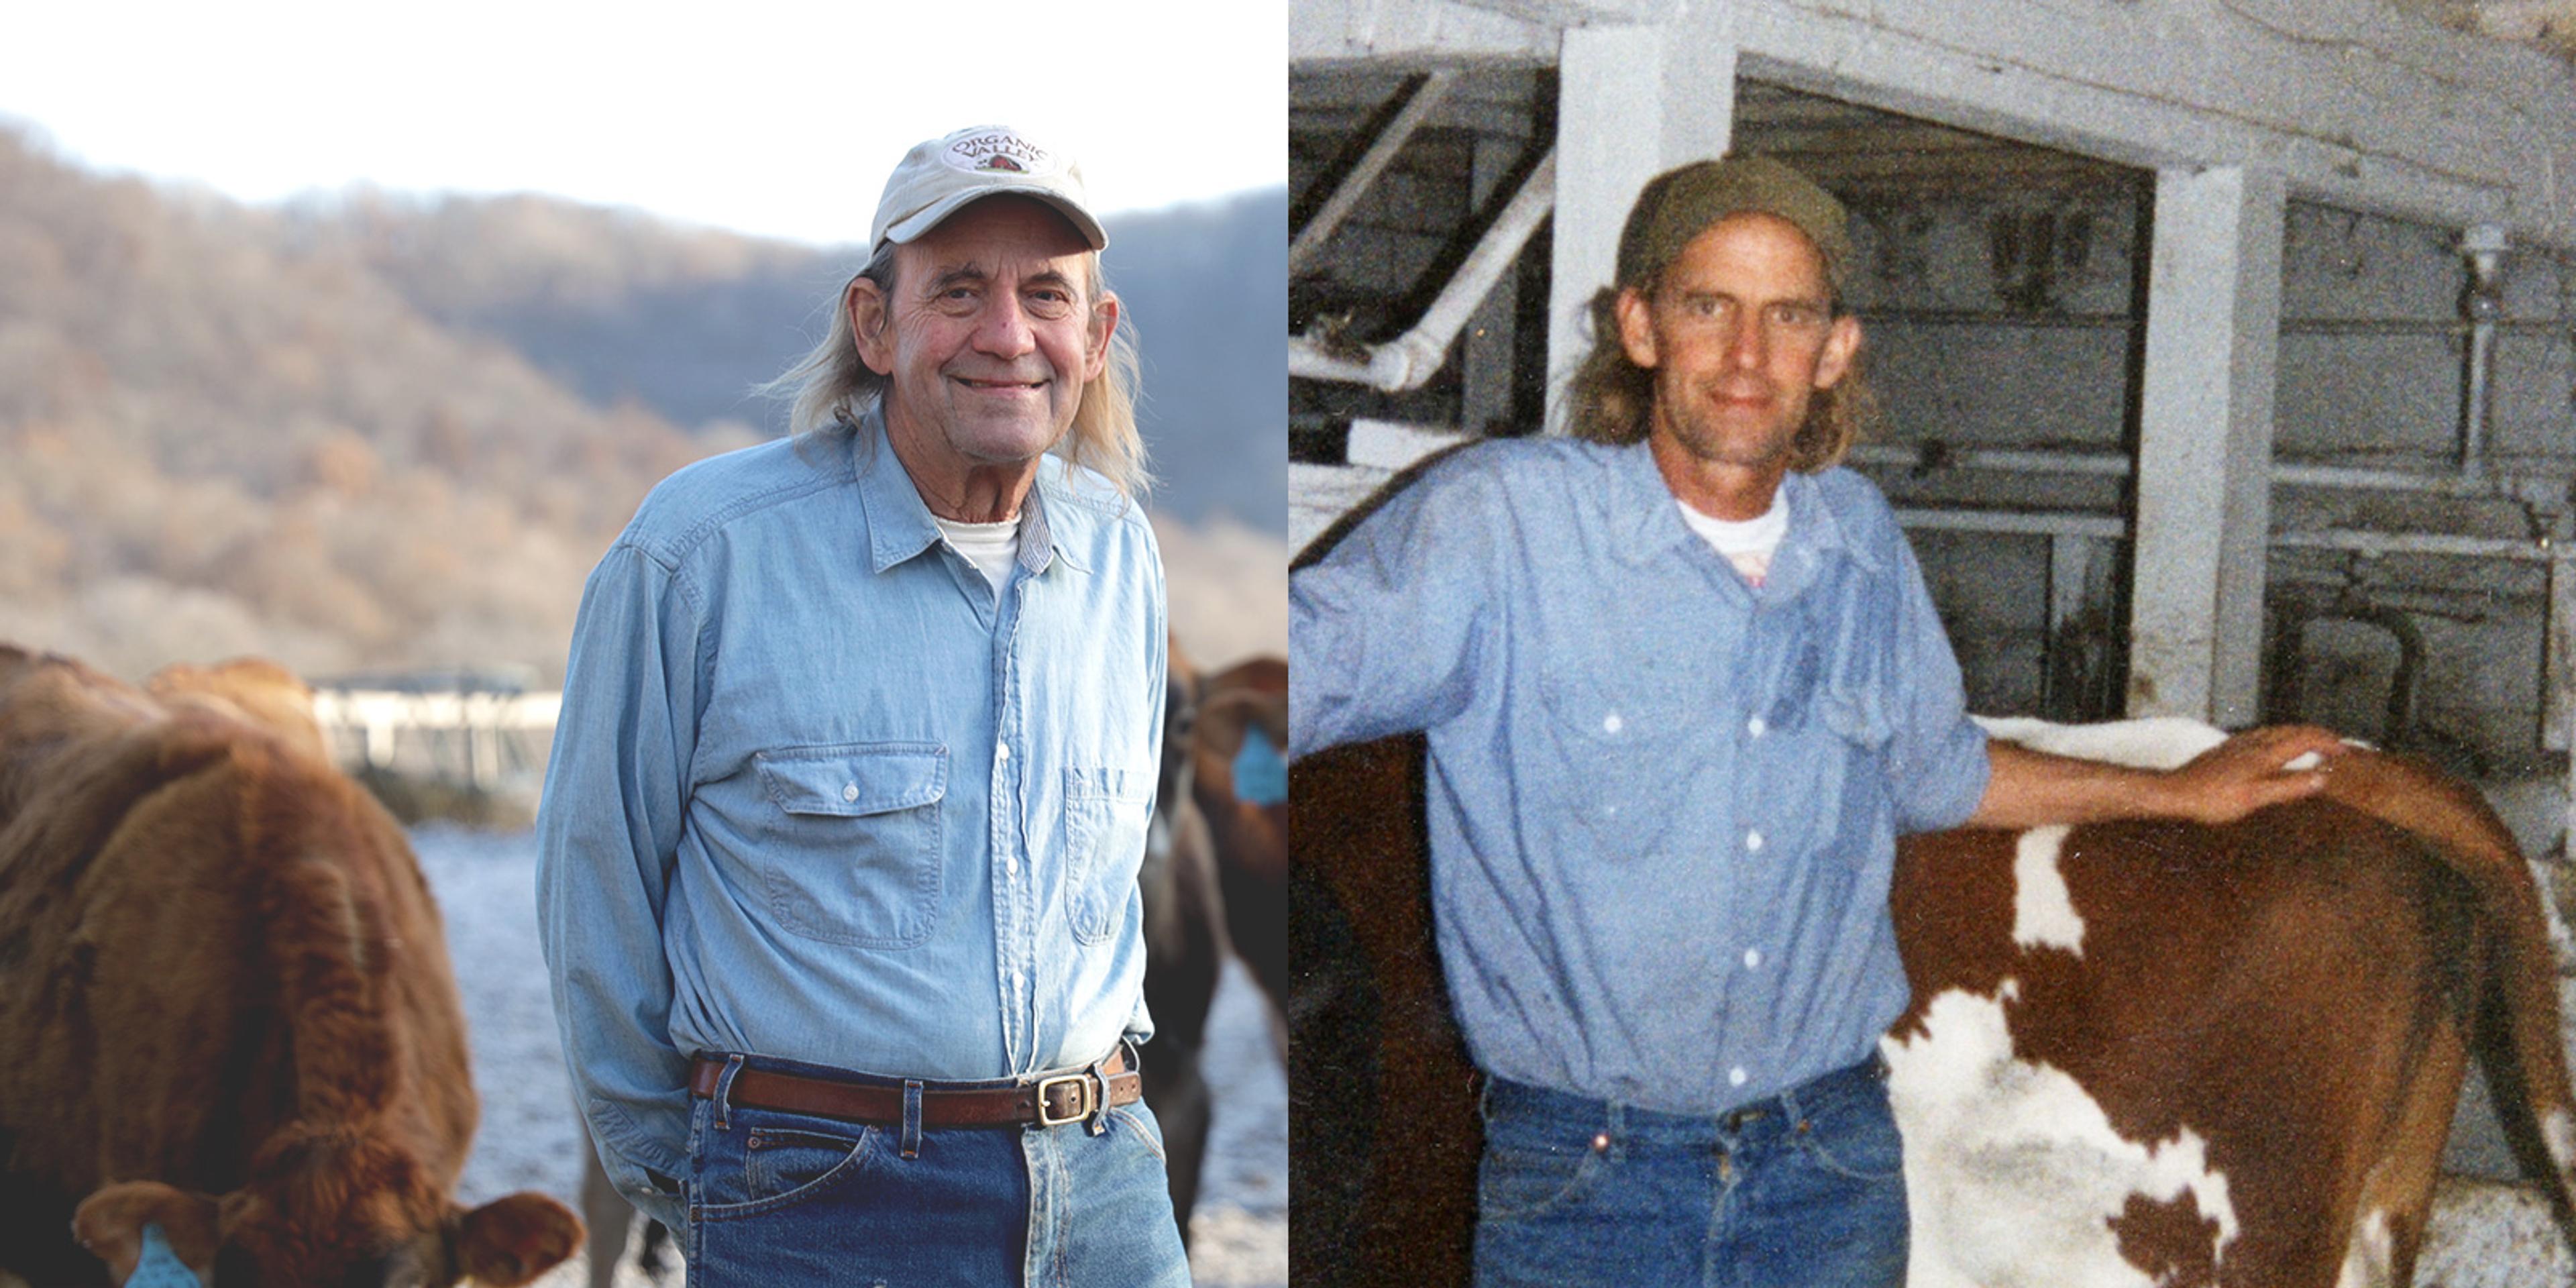 George Siemon is shown in side-by-side photos with cattle on his Wisconsin farm in 2023 and in a historical photo.